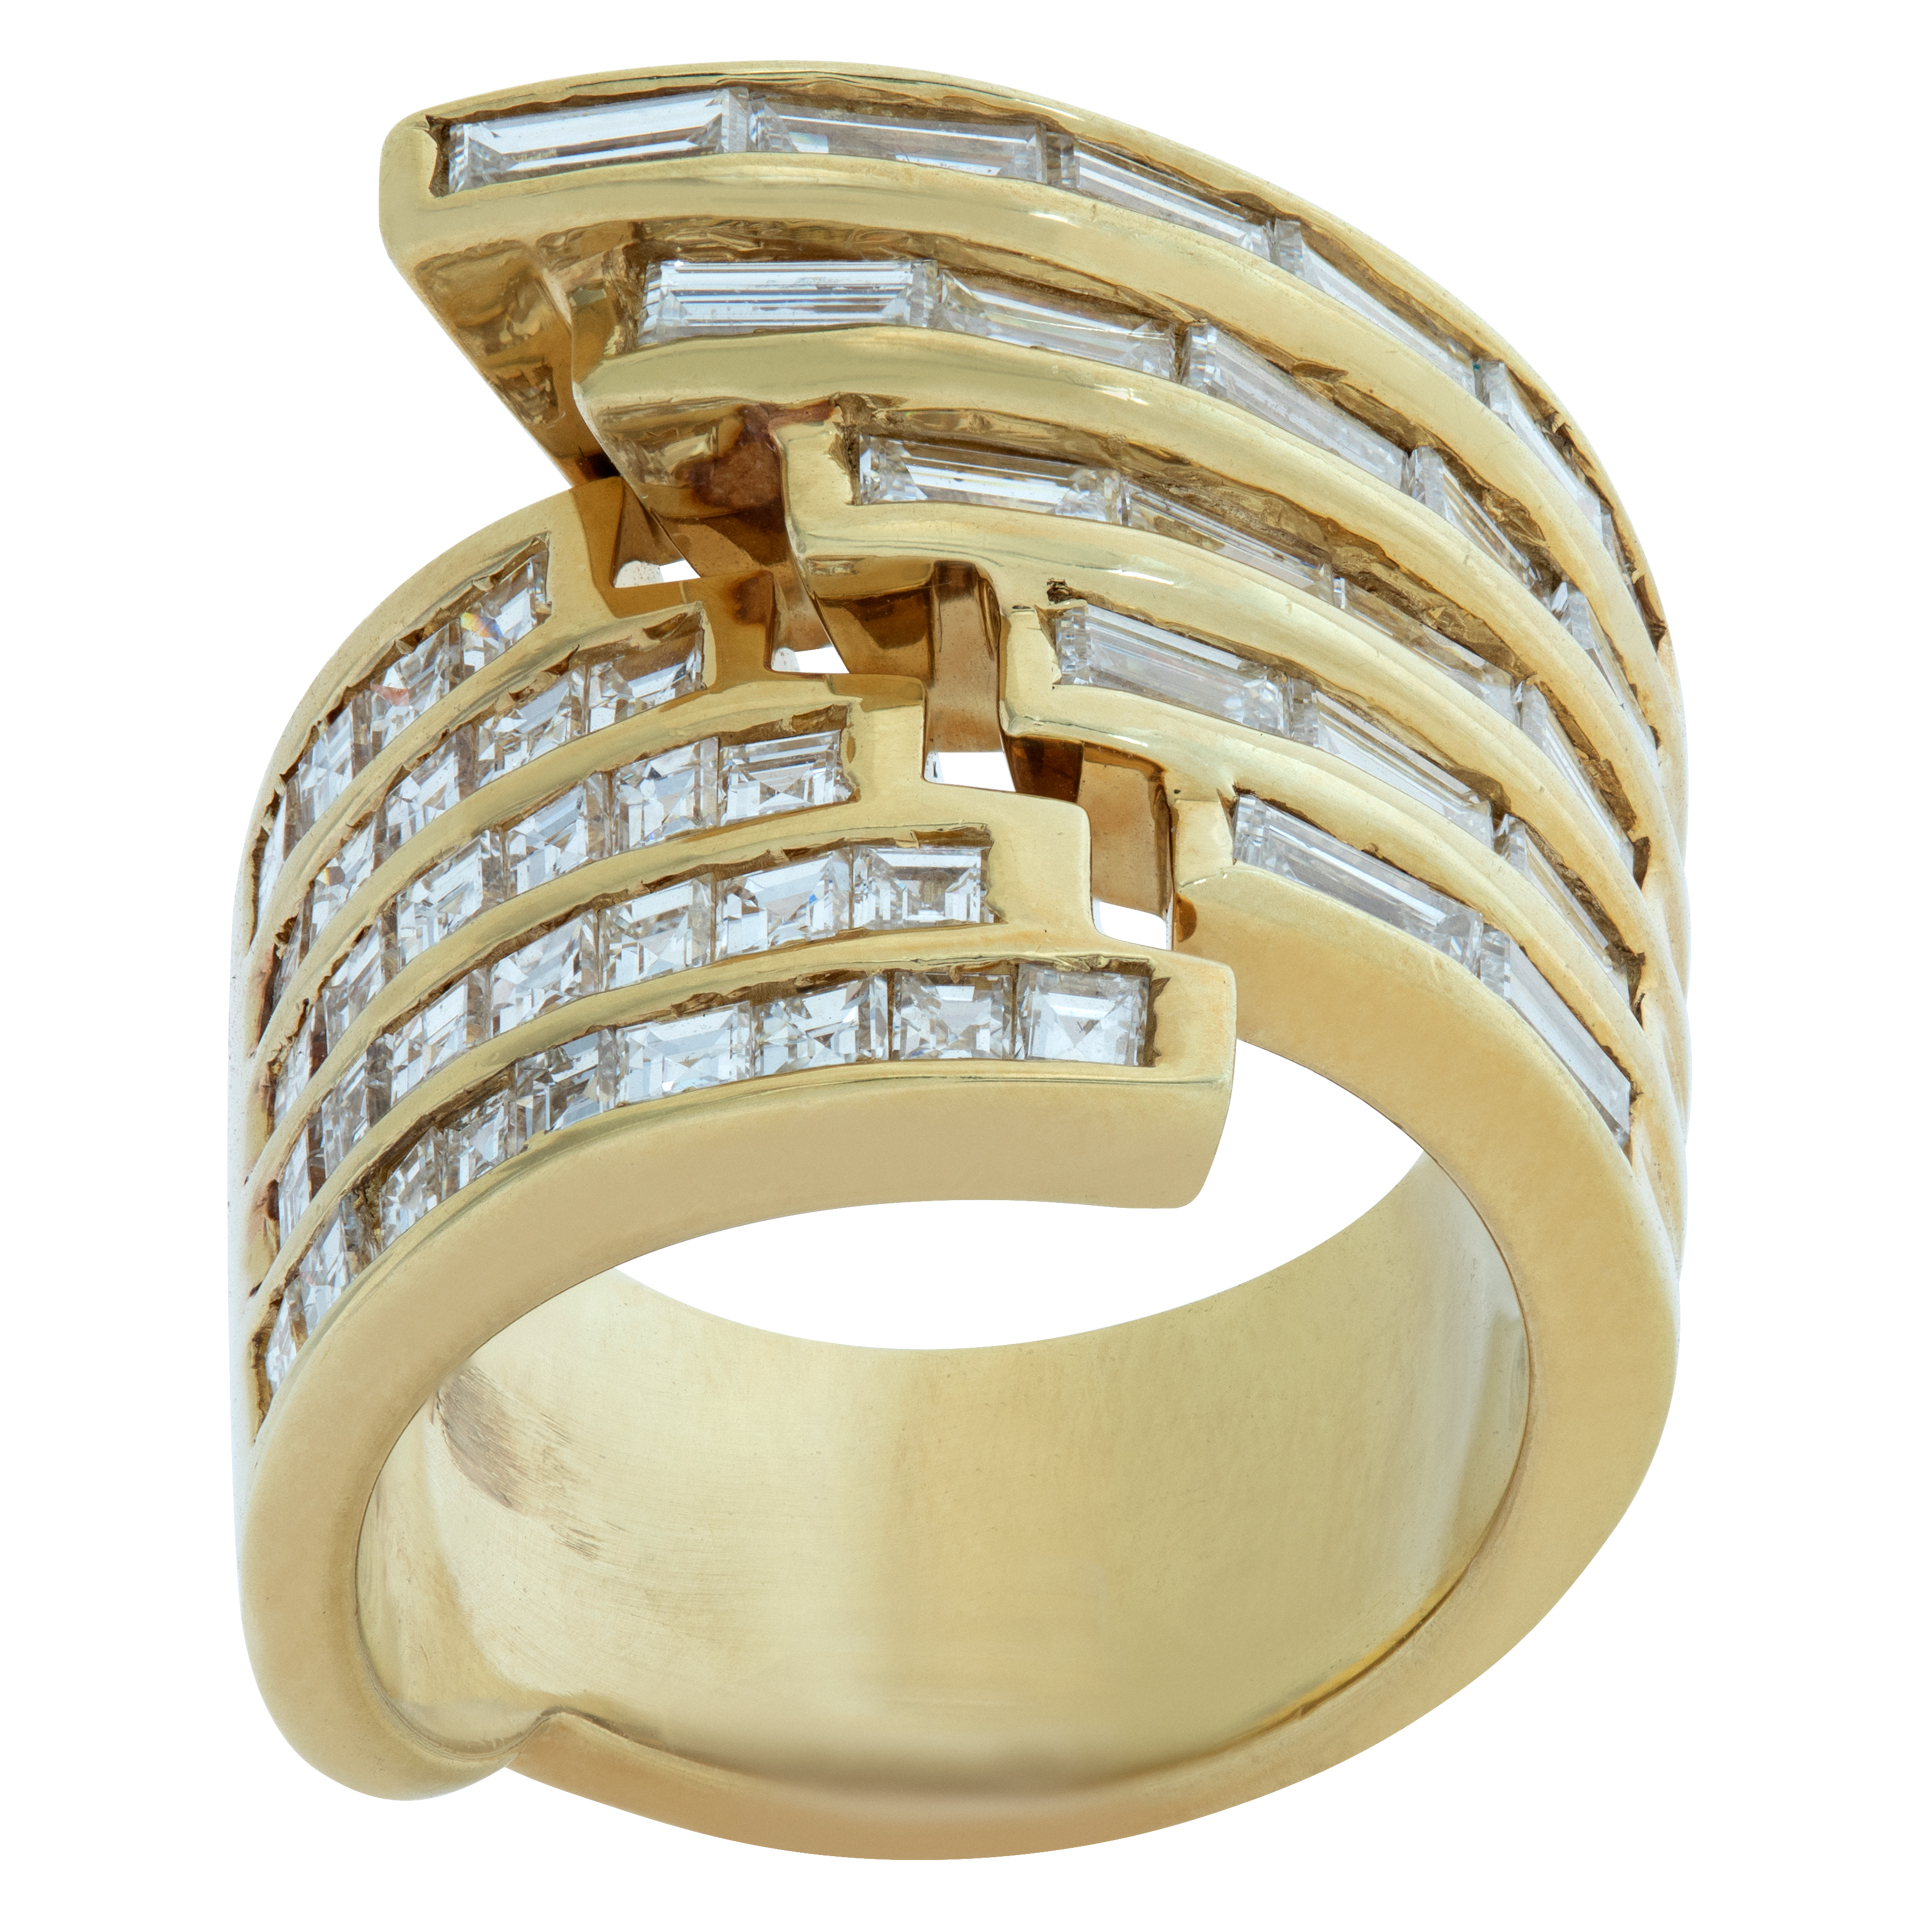 Wide 18k gold ring with princess cut diamonds and baguette diamonds